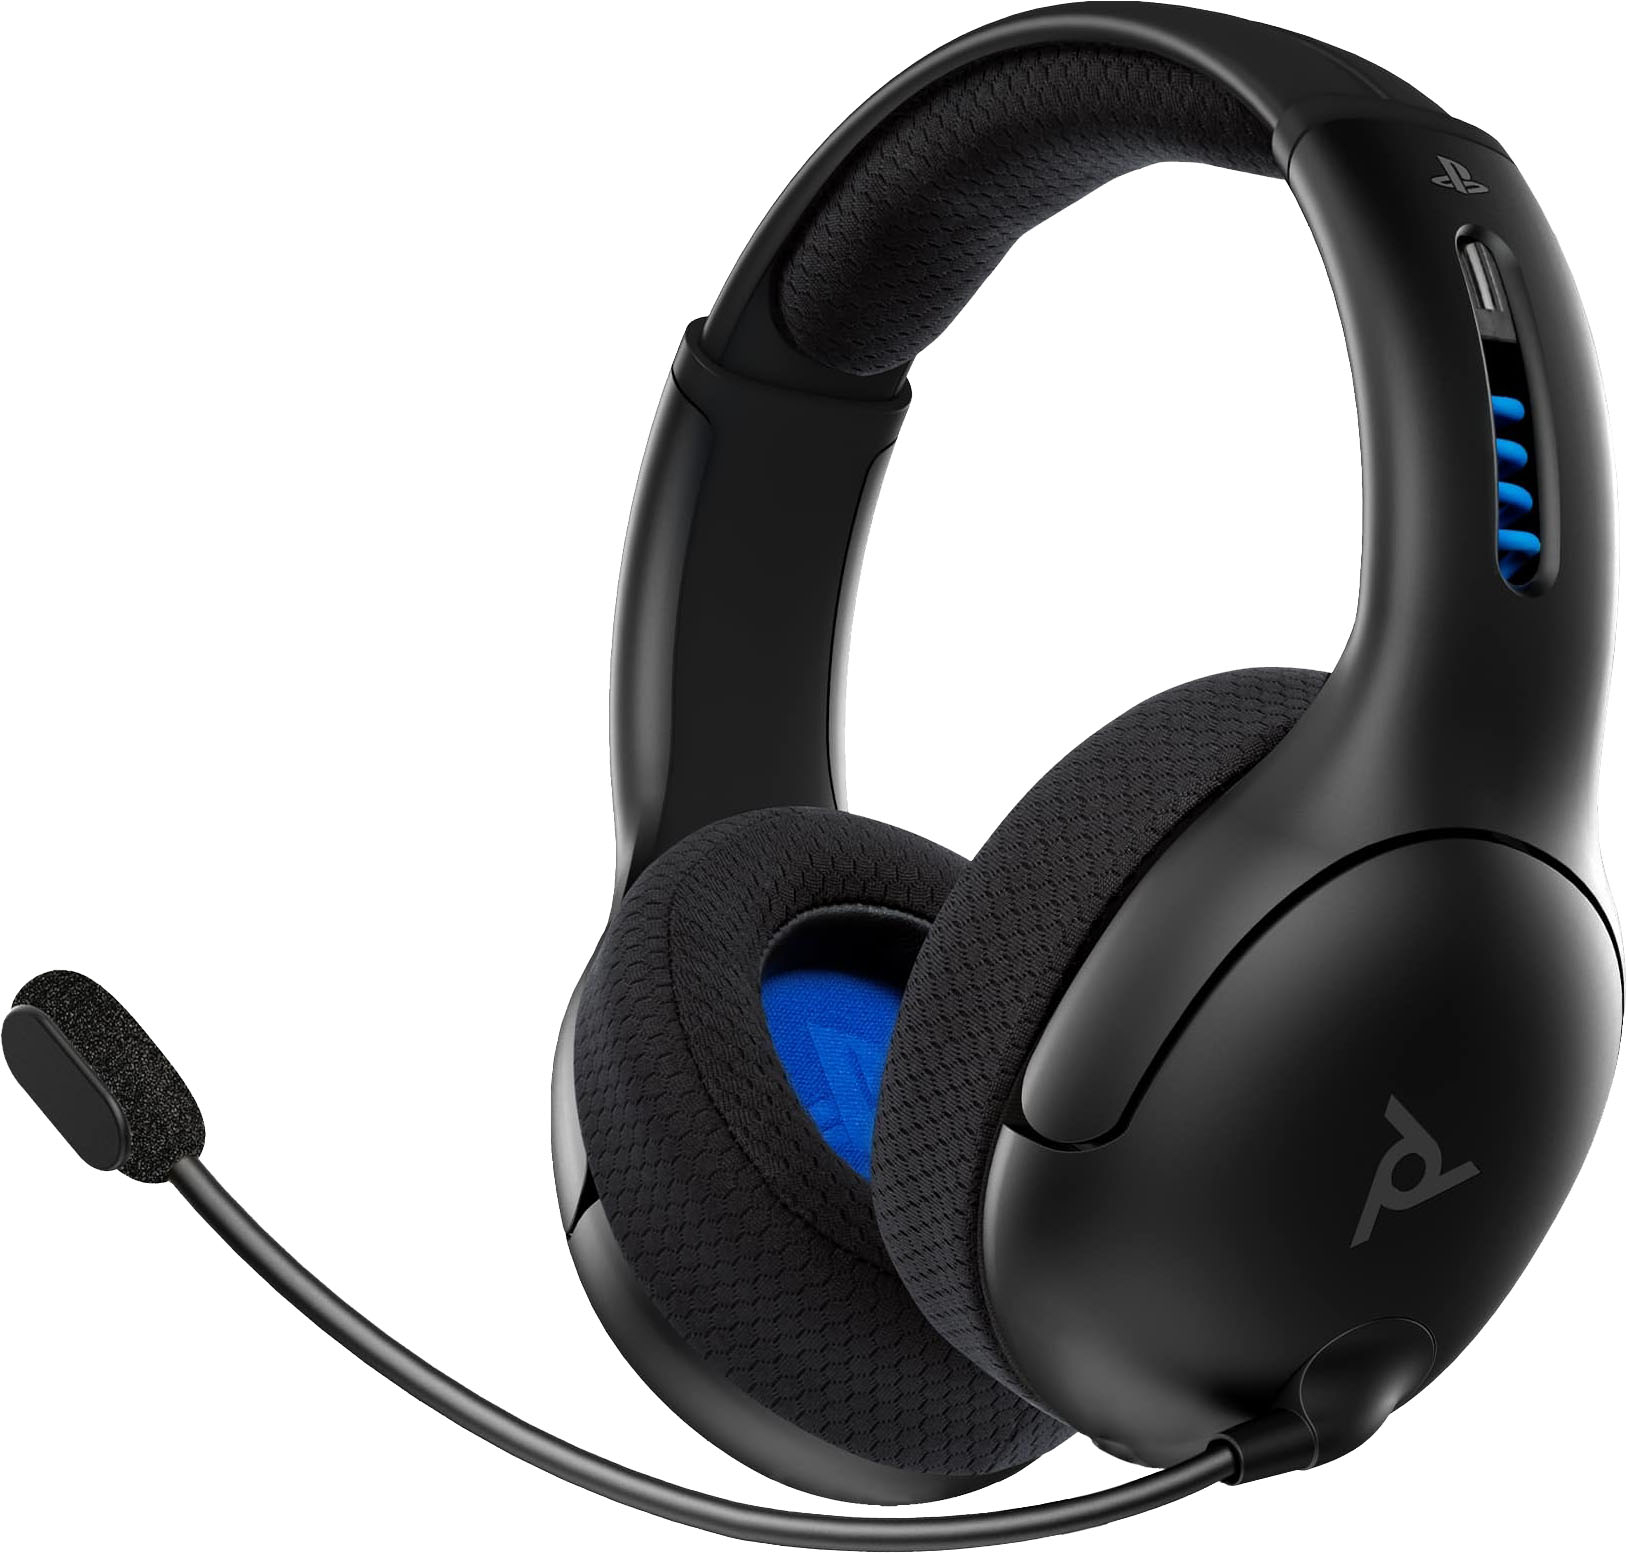 PDP LVL50 Wireless Gaming Stereo Headset with Noise Cancelling Microphone - Grey